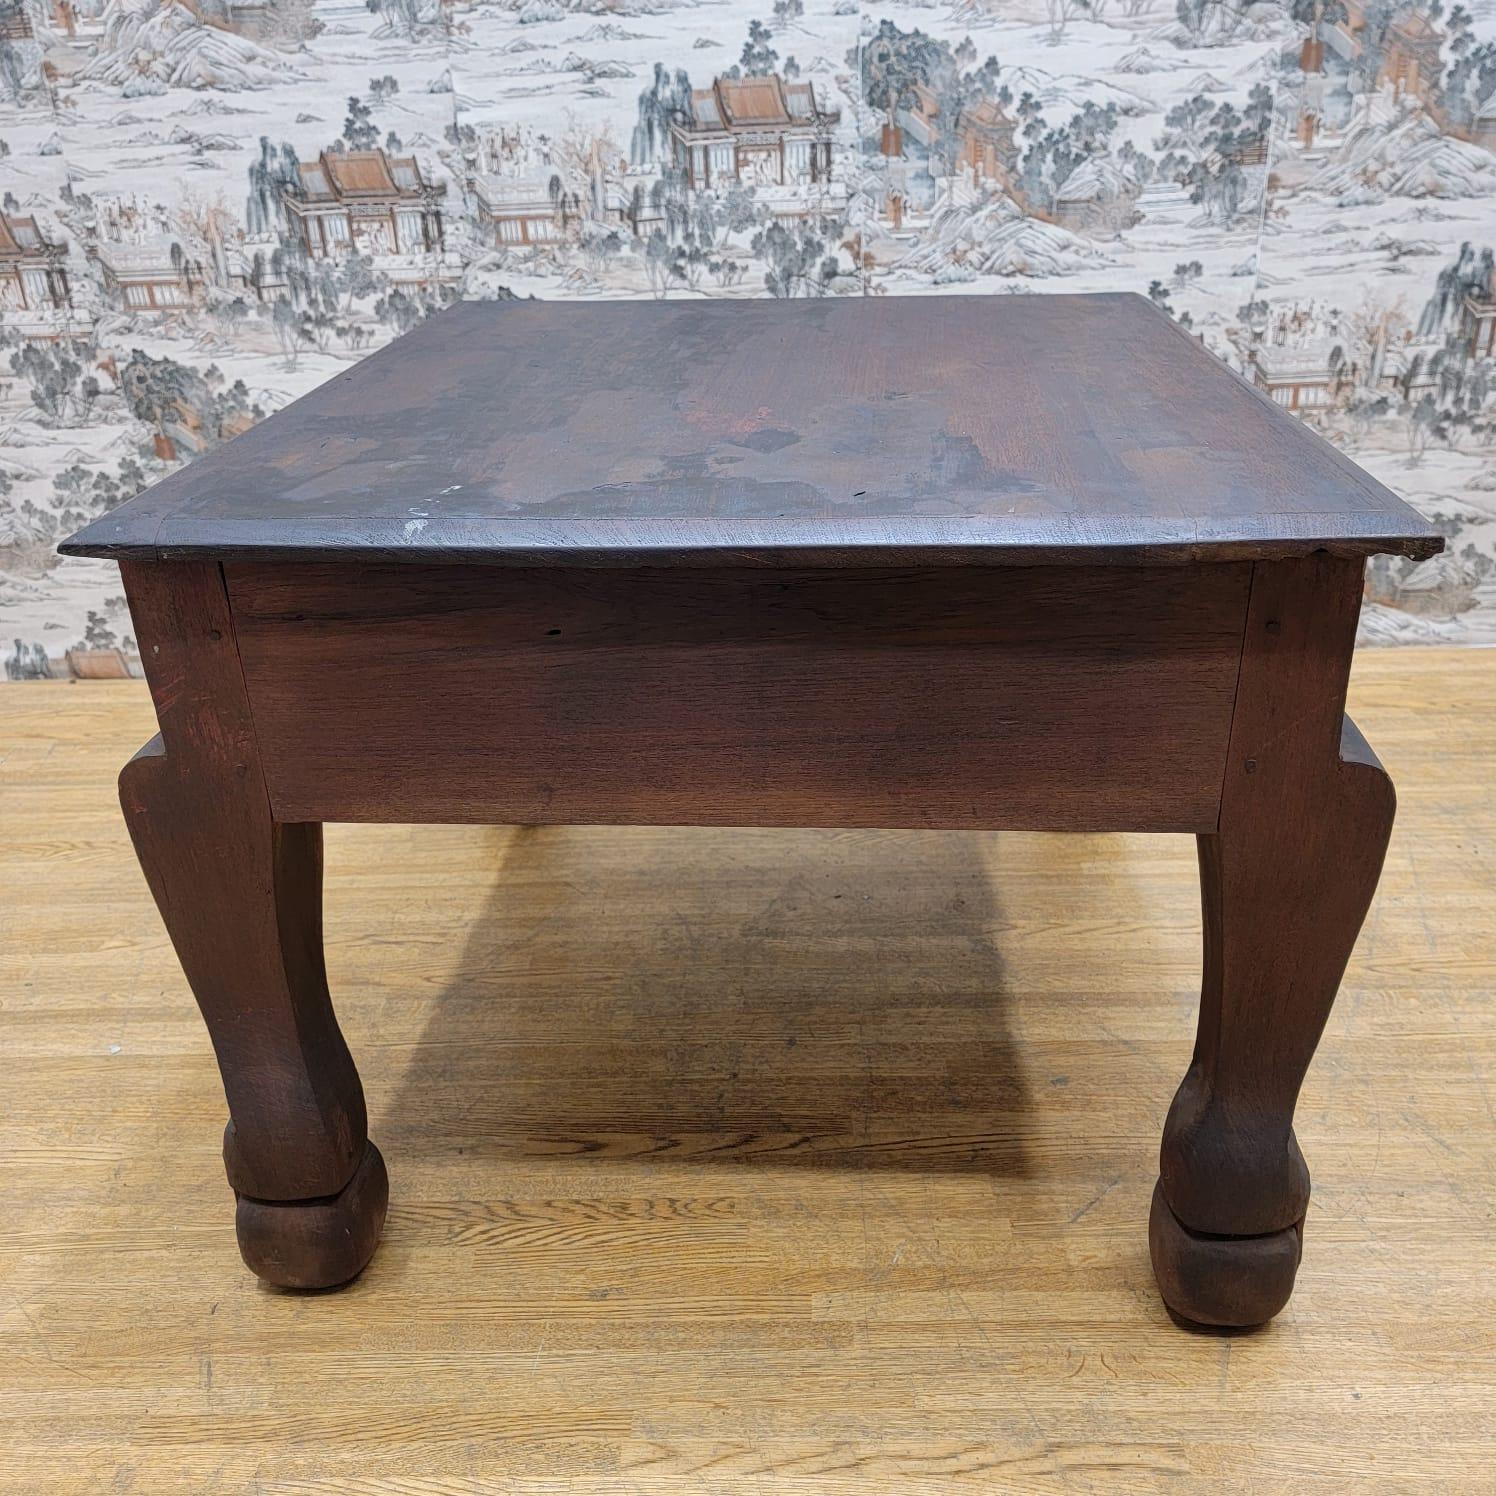 Antique East Indian Teak Wood Square Side Table with Carved Legs and Apron For Sale 3